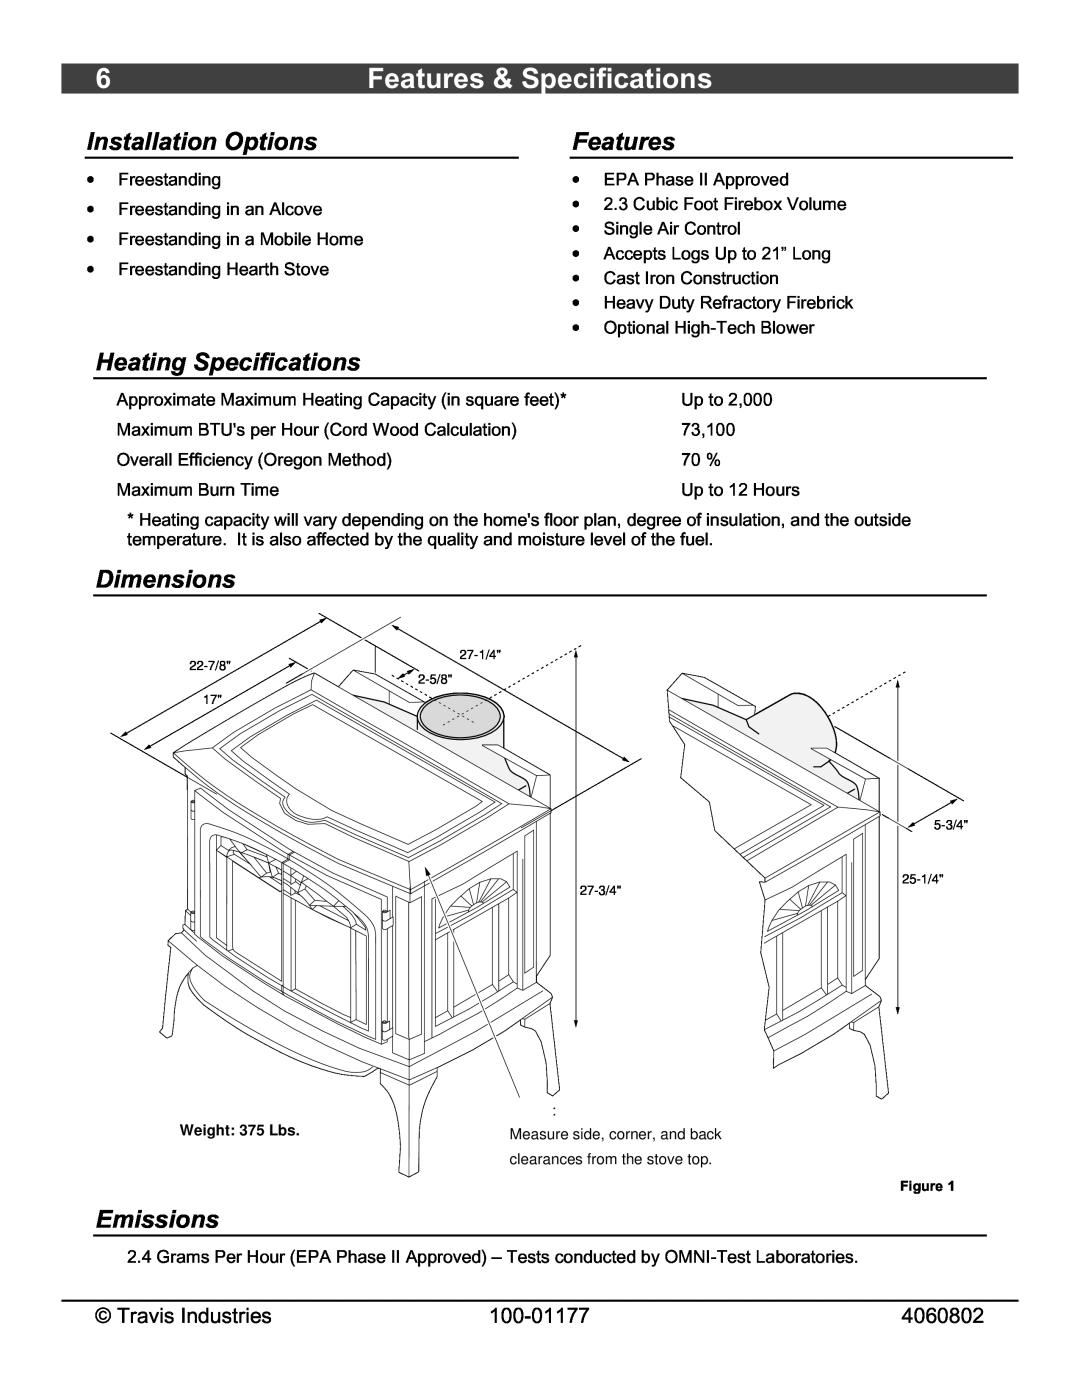 Lopi Stove owner manual Features & Specifications, Installation Options, Heating Specifications, Dimensions, Emissions 